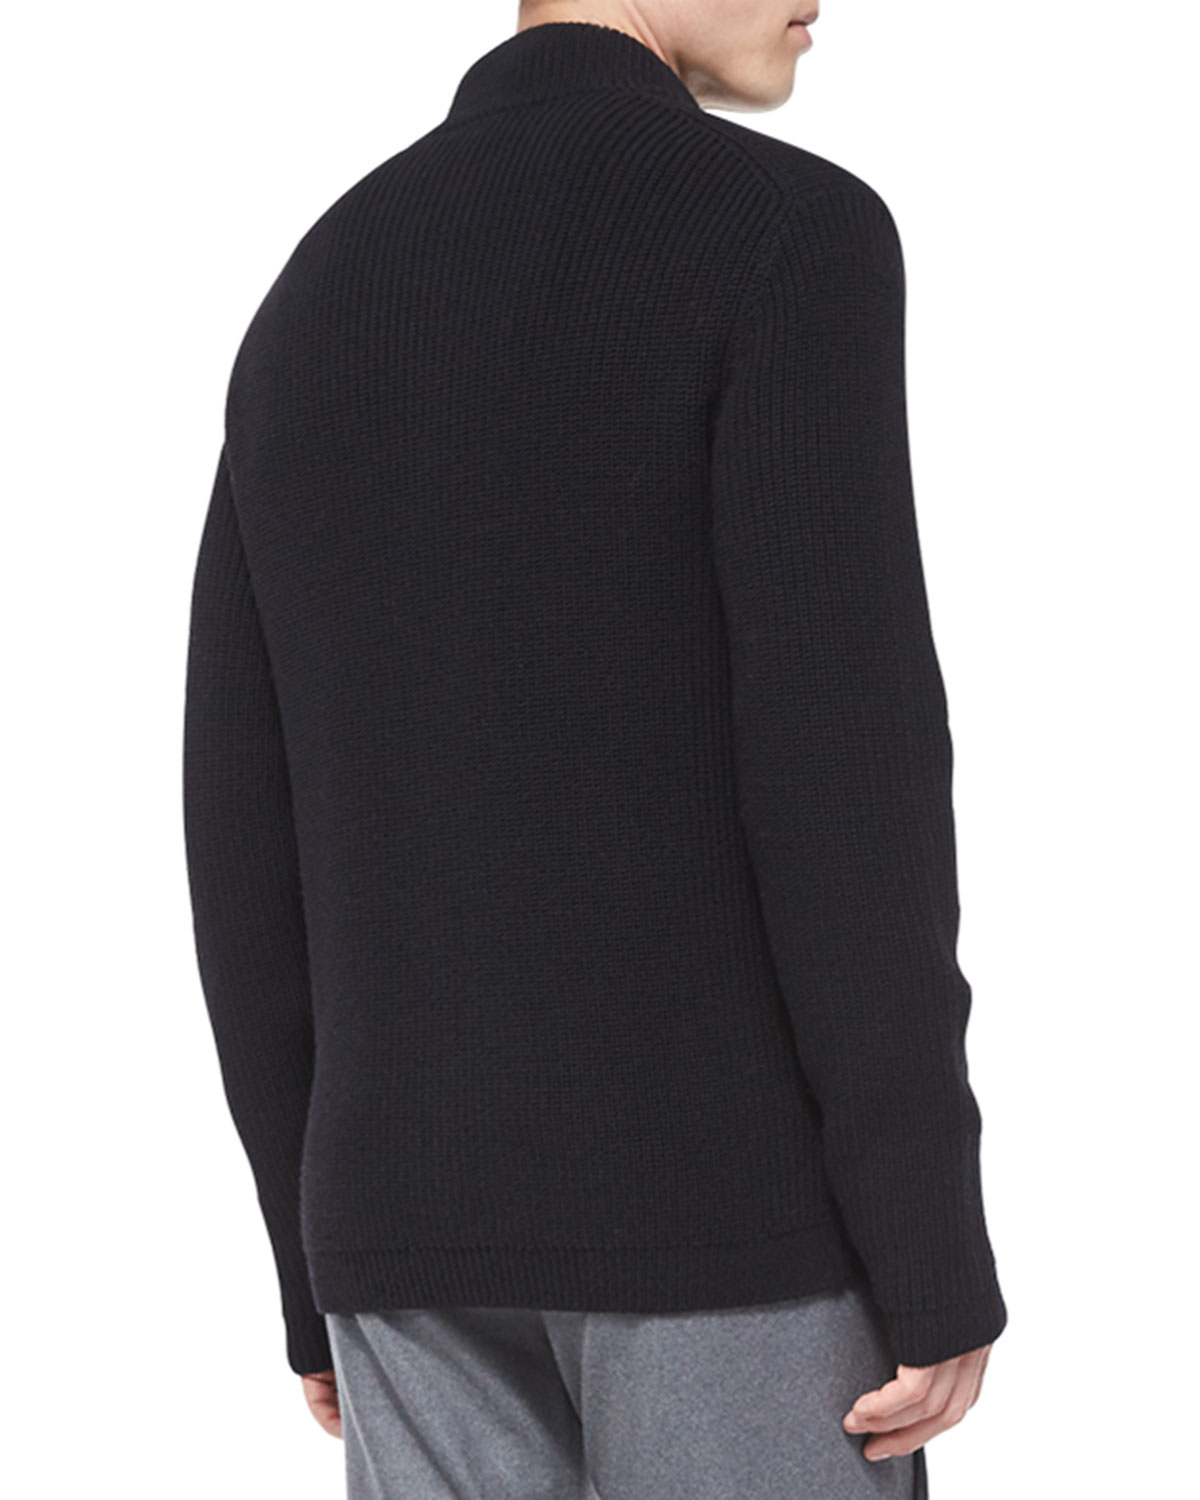 Lyst - Theory Lacham Ribbed Zip-up Sweater in Black for Men